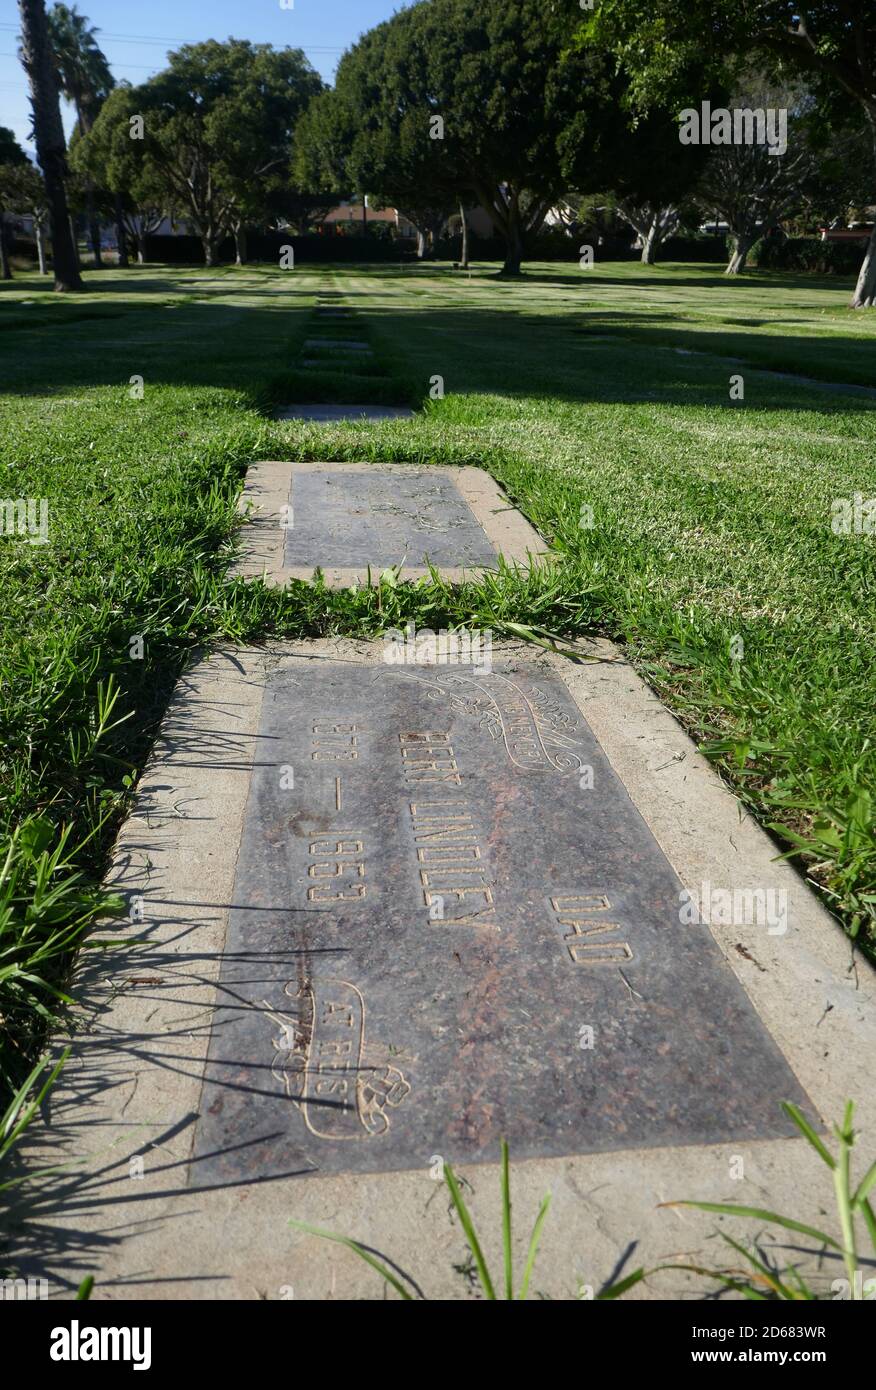 Santa Monica, California, USA 14th October 2020 A general view of atmosphere of actress Audra Lindley's Grave, unmarked, buried with her father Bert Lindley at Woodlawn Cemetery on October 14, 2020  in Santa Monica, California, USA. Photo by Barry King/Alamy Stock Photo Stock Photo